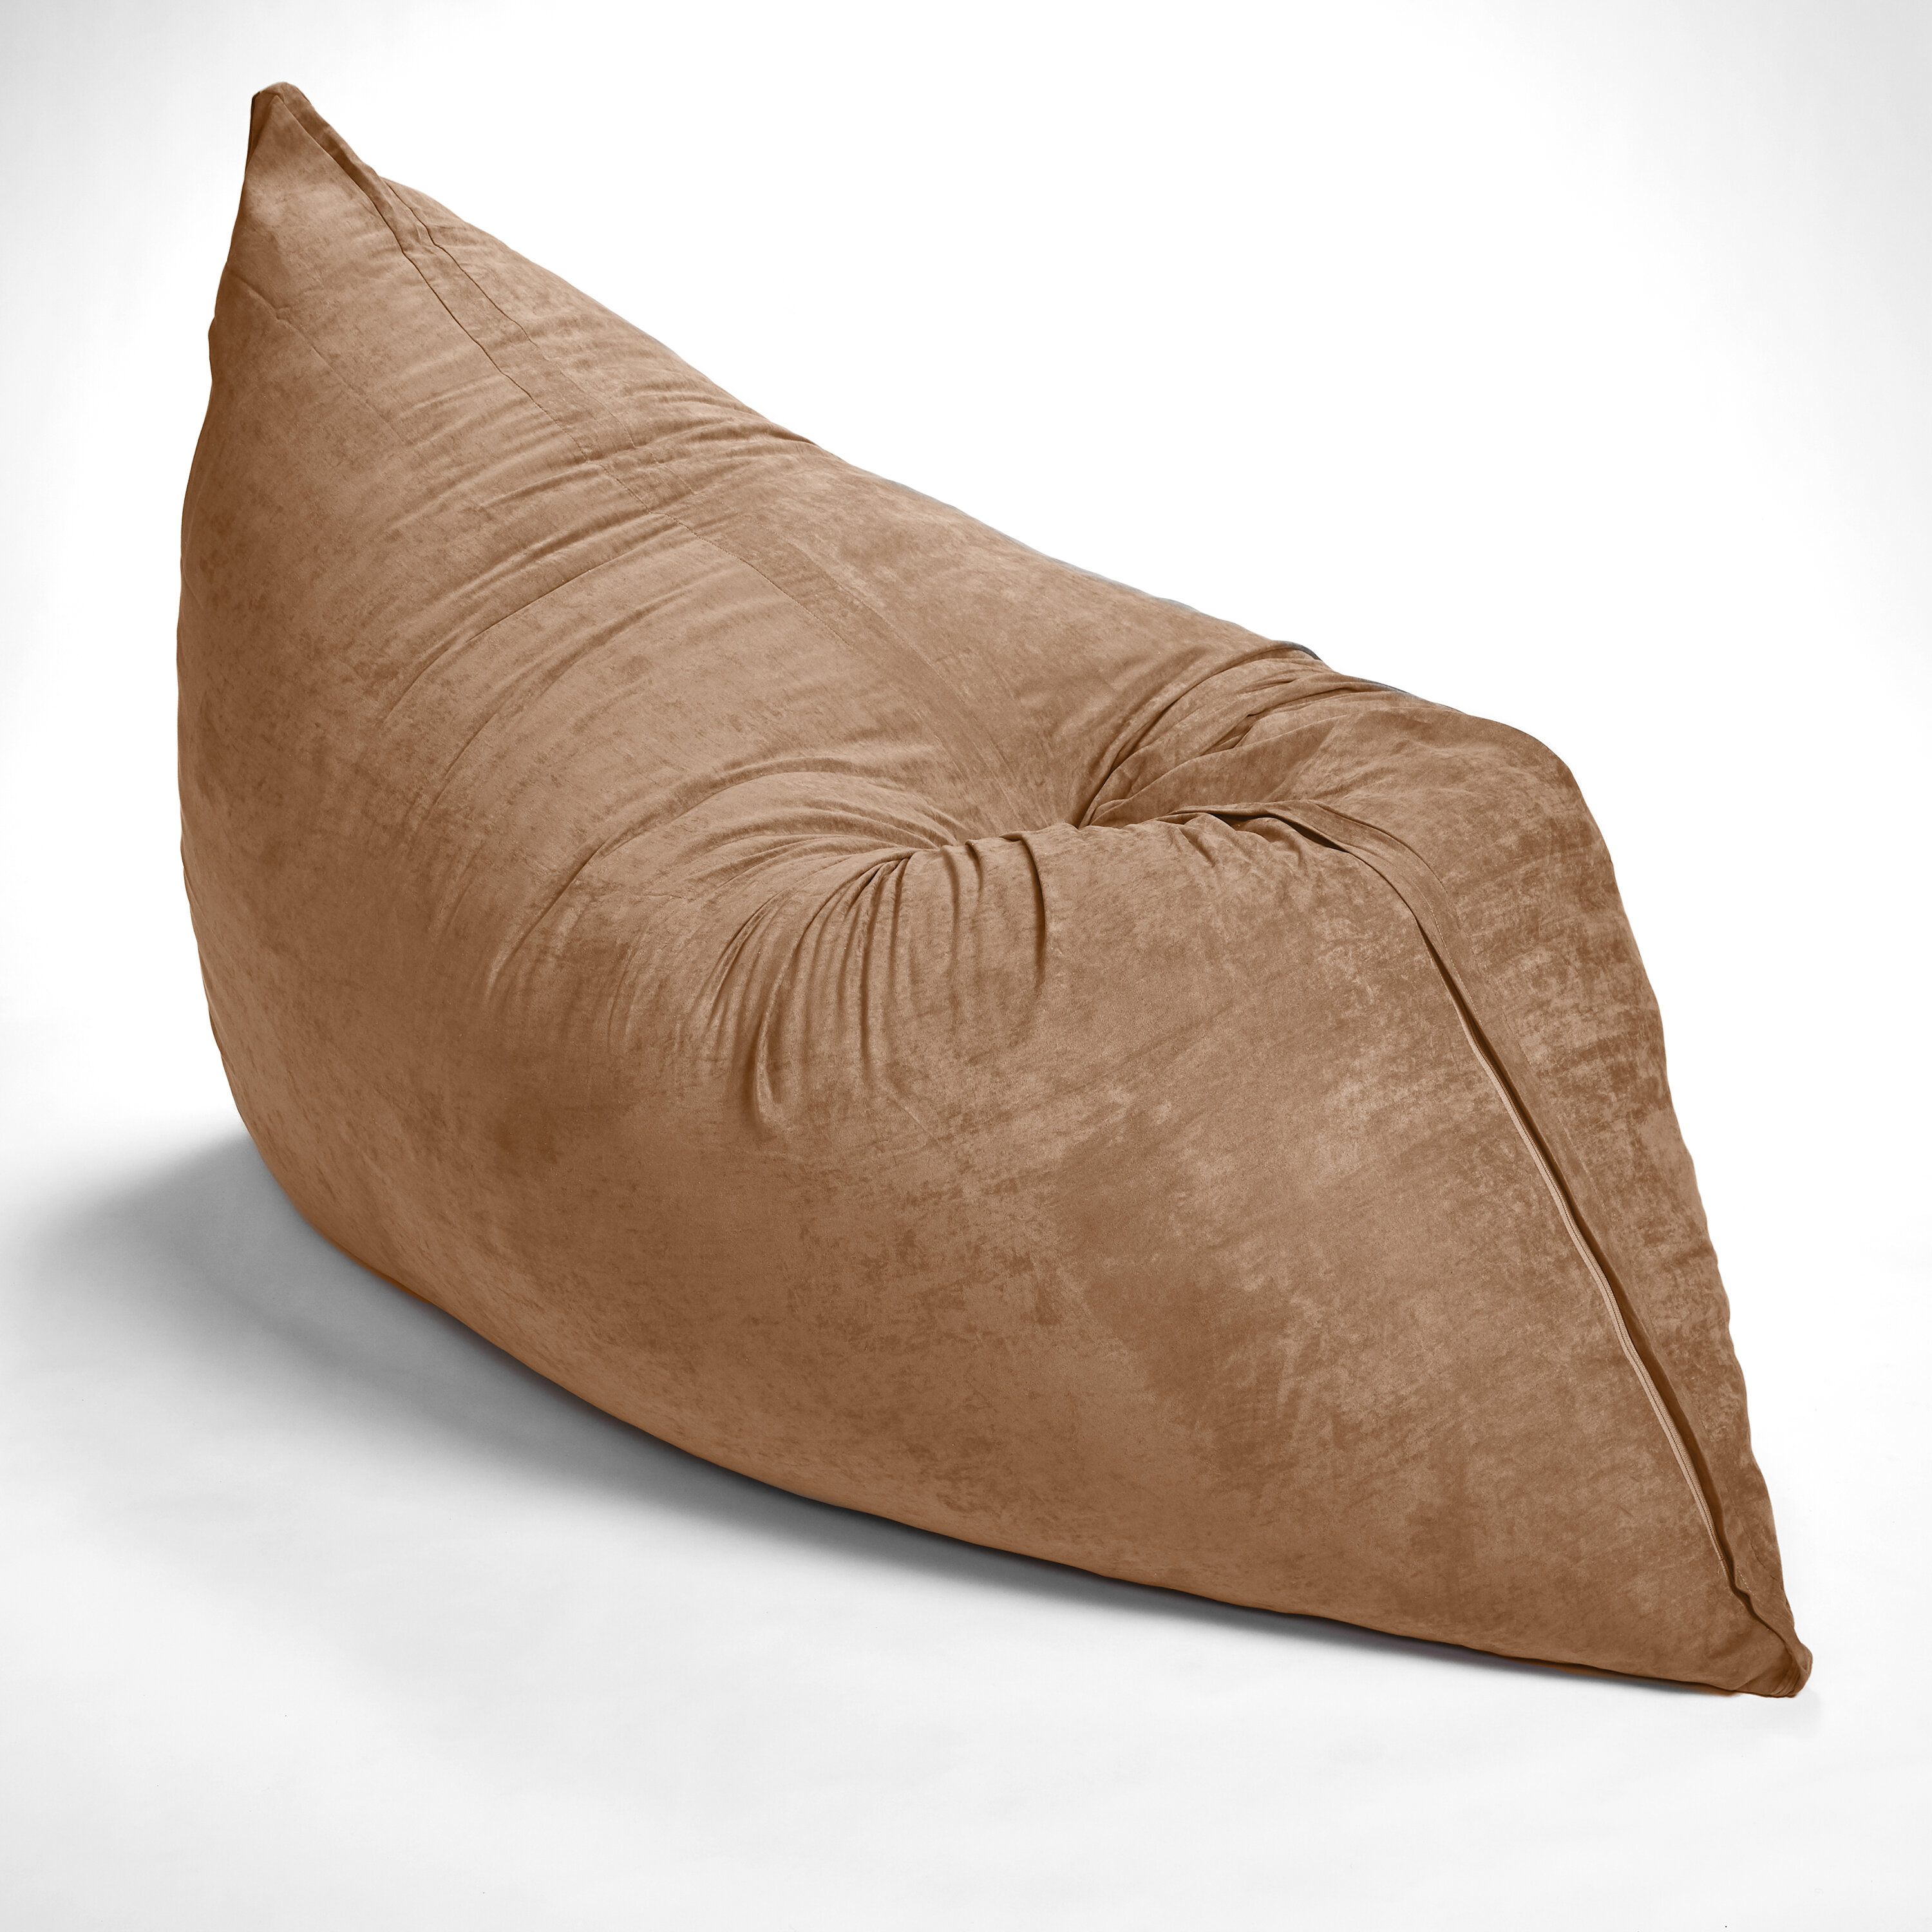 Big Bean Bag Lounger Adult size, Large Bean Bag Chair for Adults with Filler Included Latitude Run Fabric: Khaki, Size: 10H x 38 W x 73 D